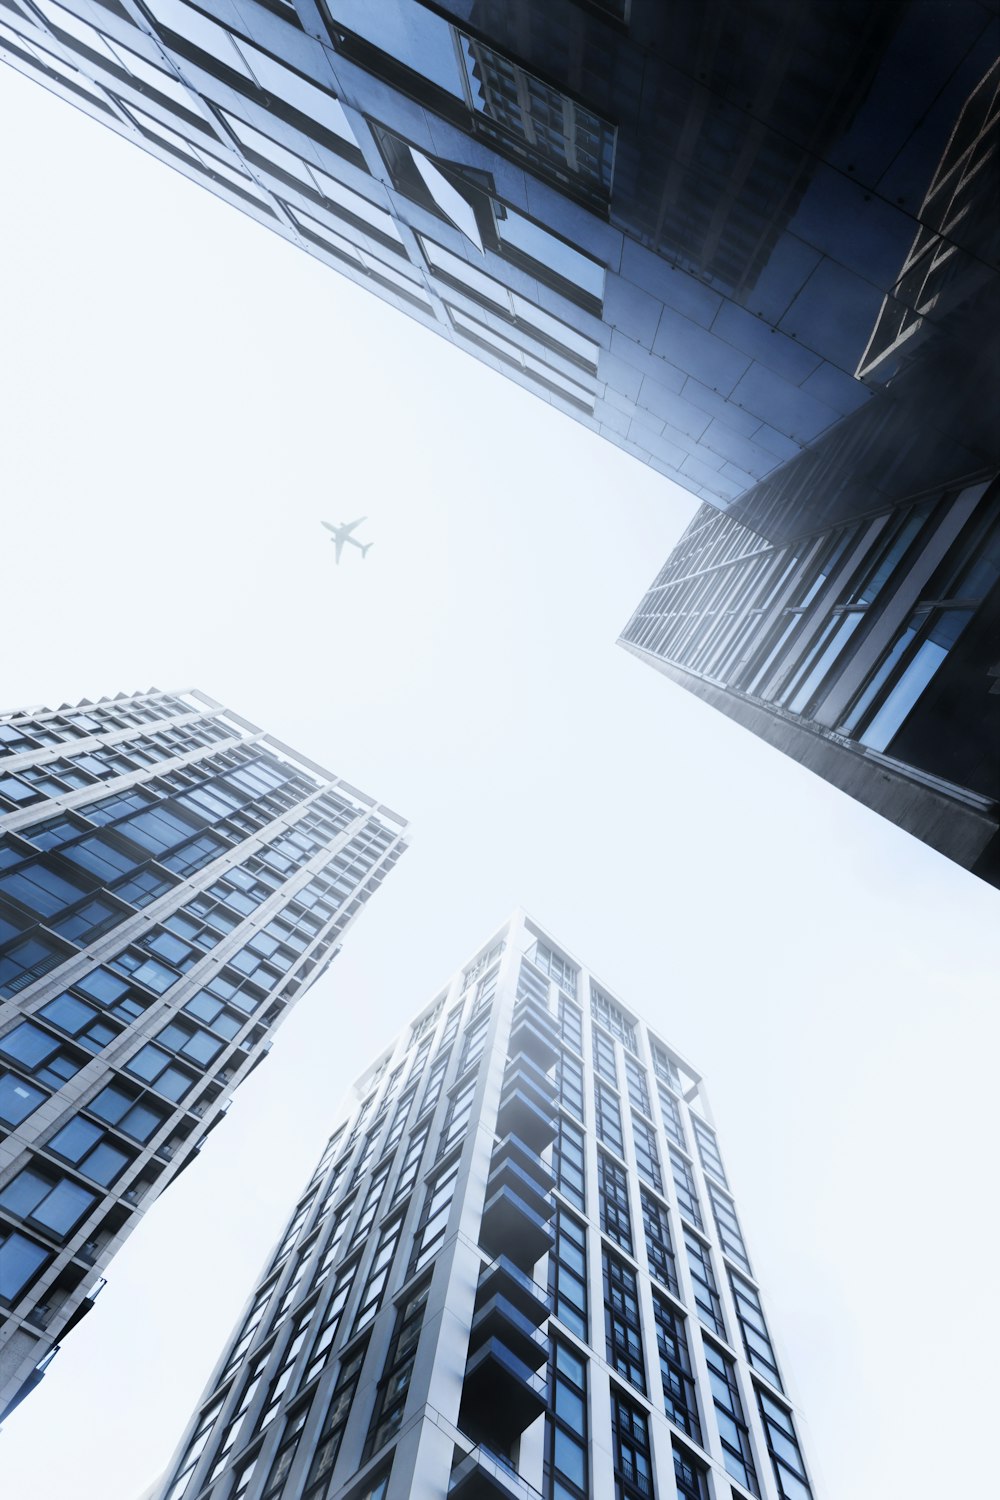 a group of tall buildings with a plane flying in the sky